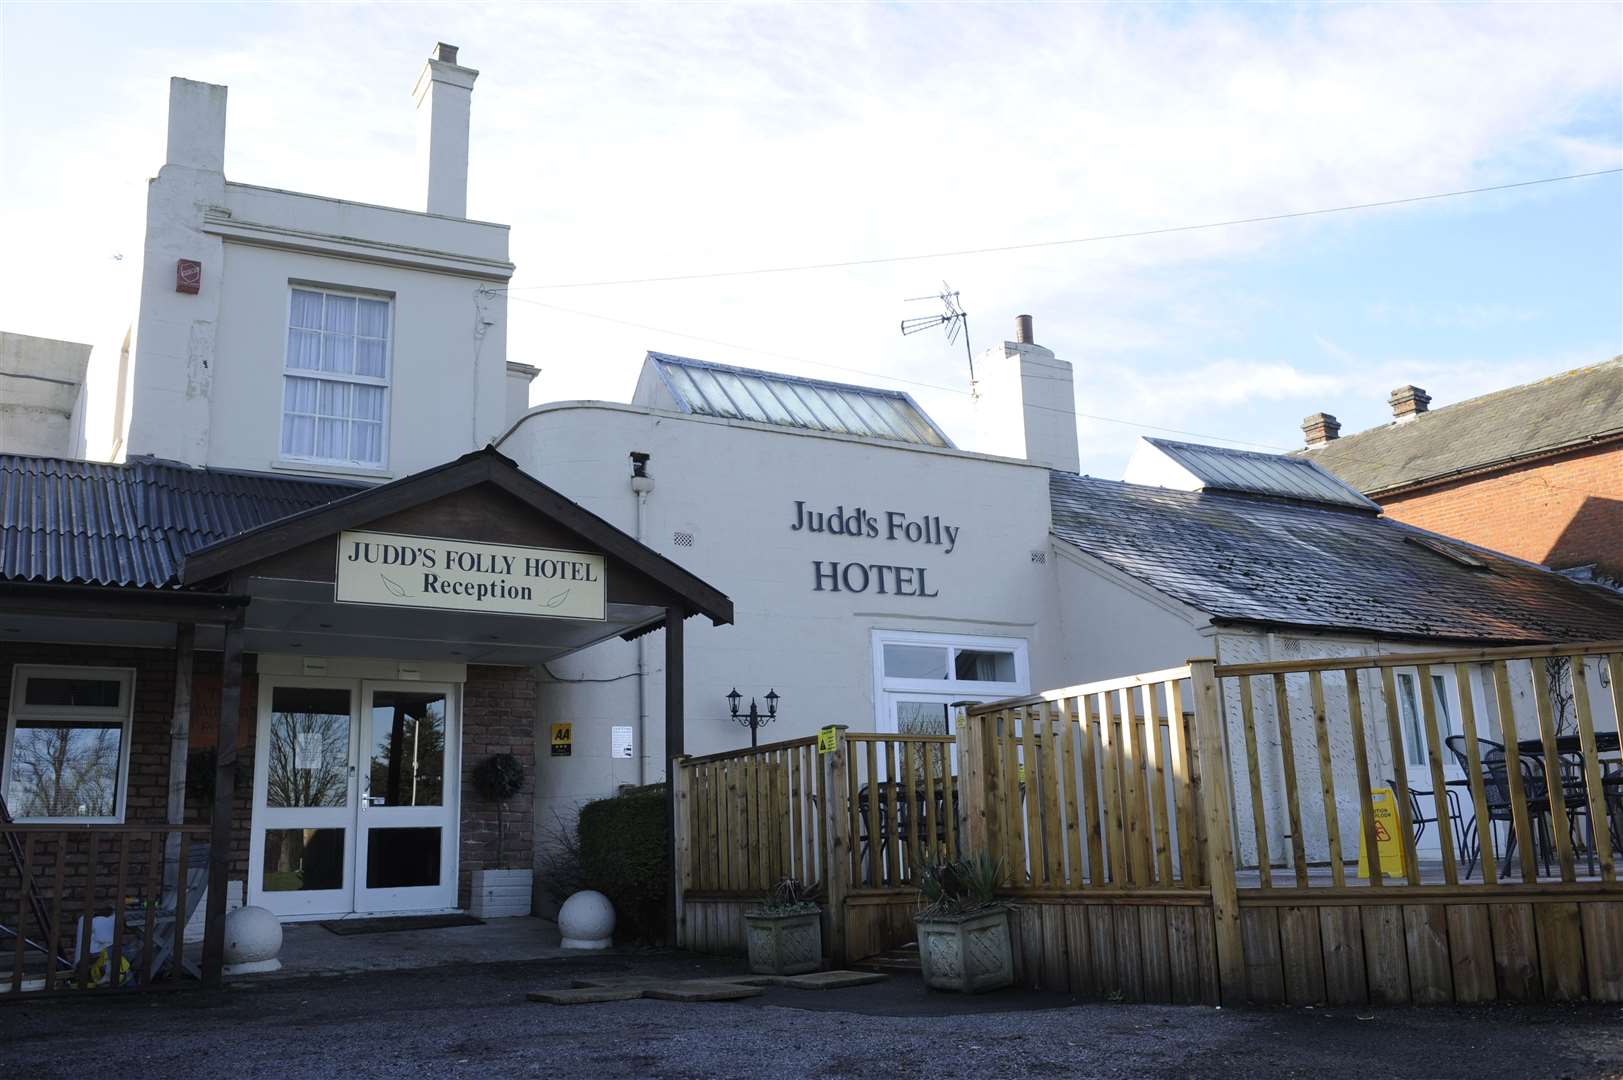 Judds Folly Hotel in Syndale Park, London Road, Faversham Picture: Tony Flashman